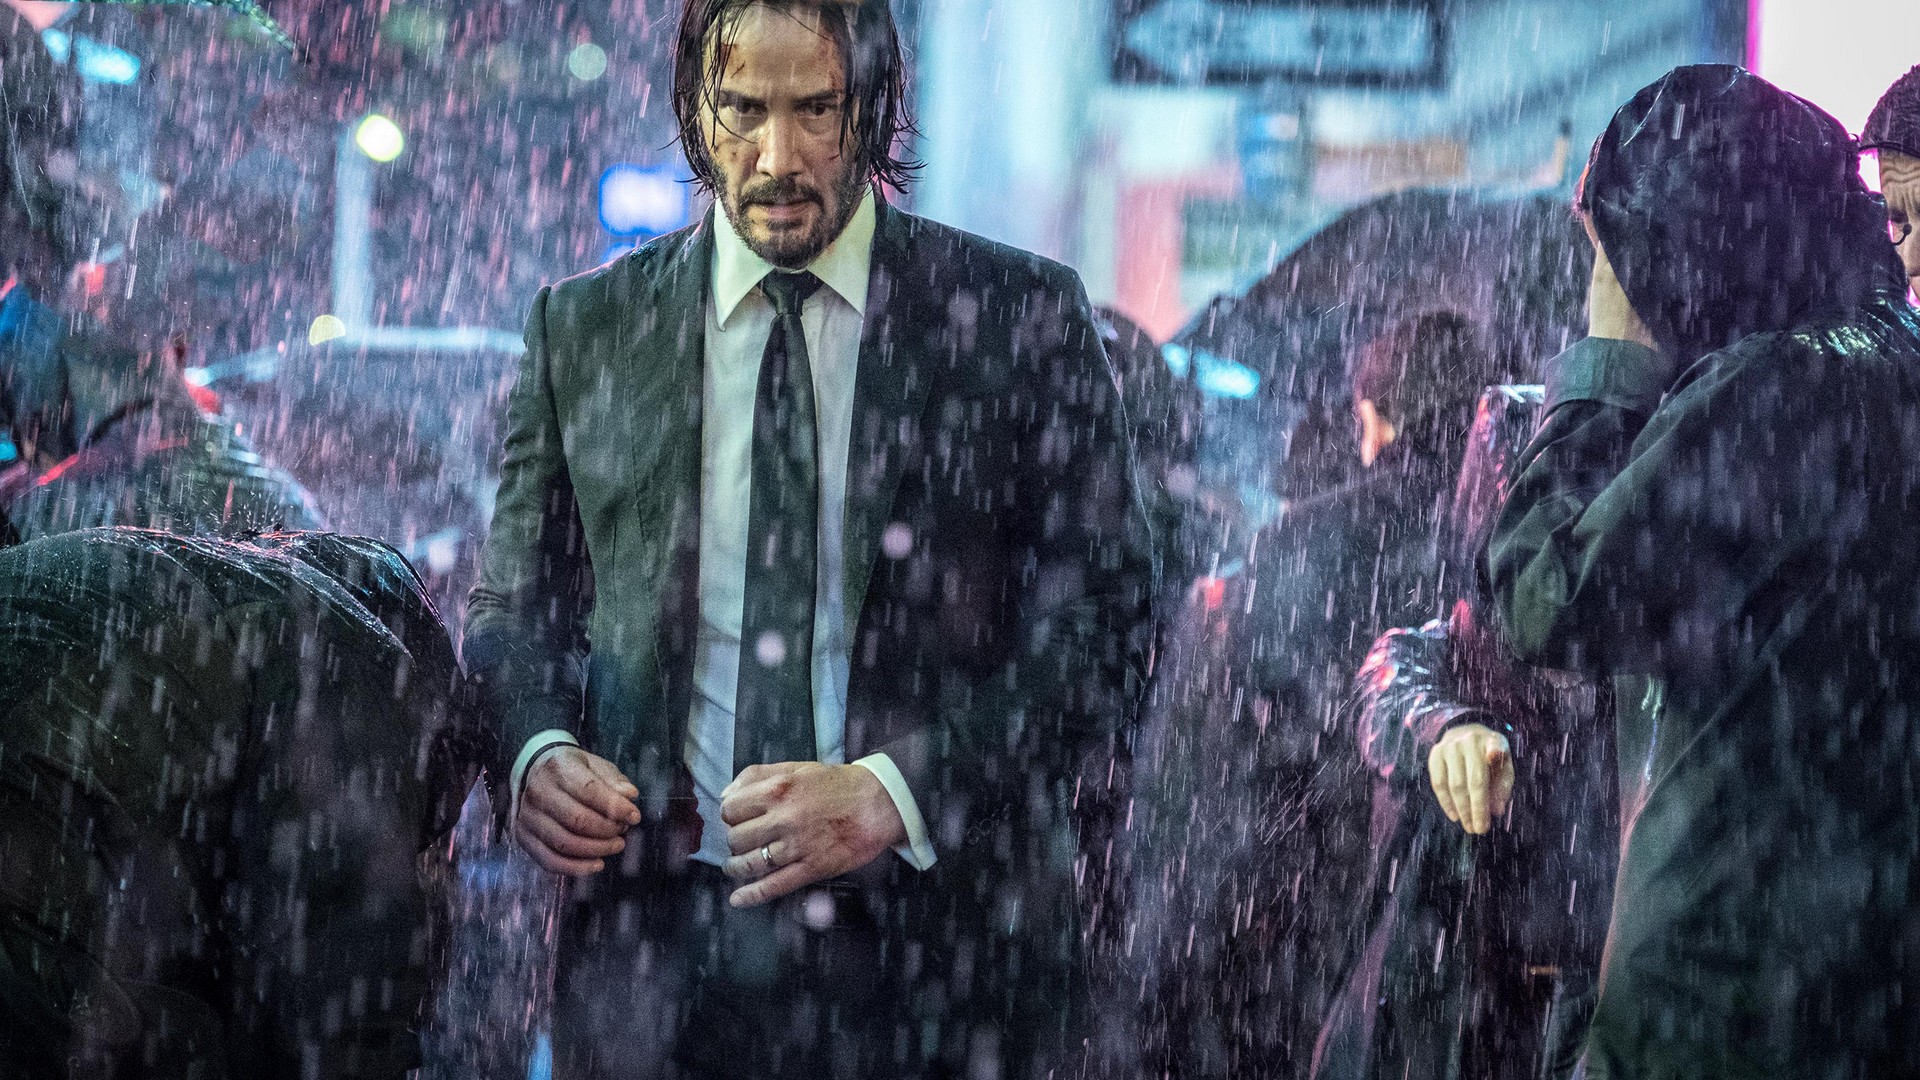 John Wick 3 2019 Wallpaper with high-resolution 1920x1080 pixel. You can use this poster wallpaper for your Desktop Computers, Mac Screensavers, Windows Backgrounds, iPhone Wallpapers, Tablet or Android Lock screen and another Mobile device